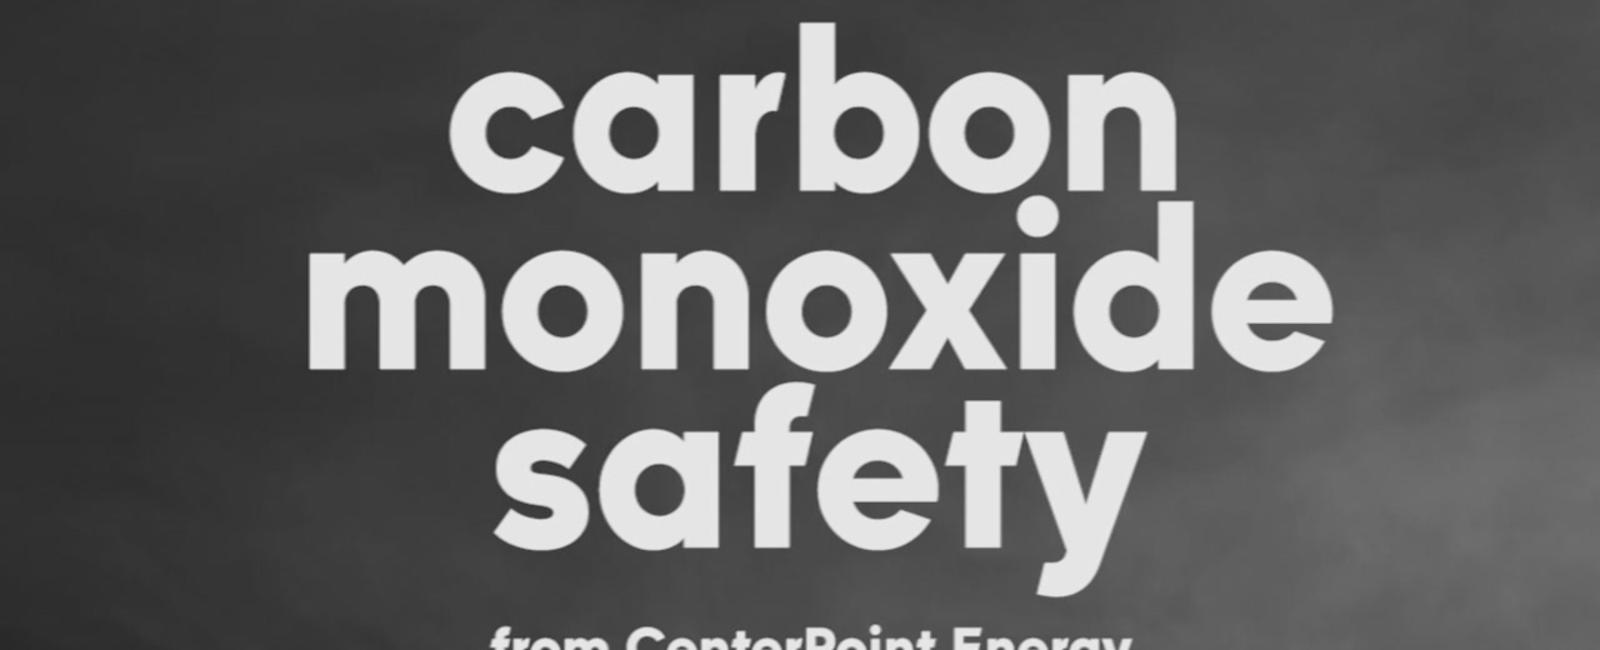 Carbon monoxide can kill a person in less than 15 minutes